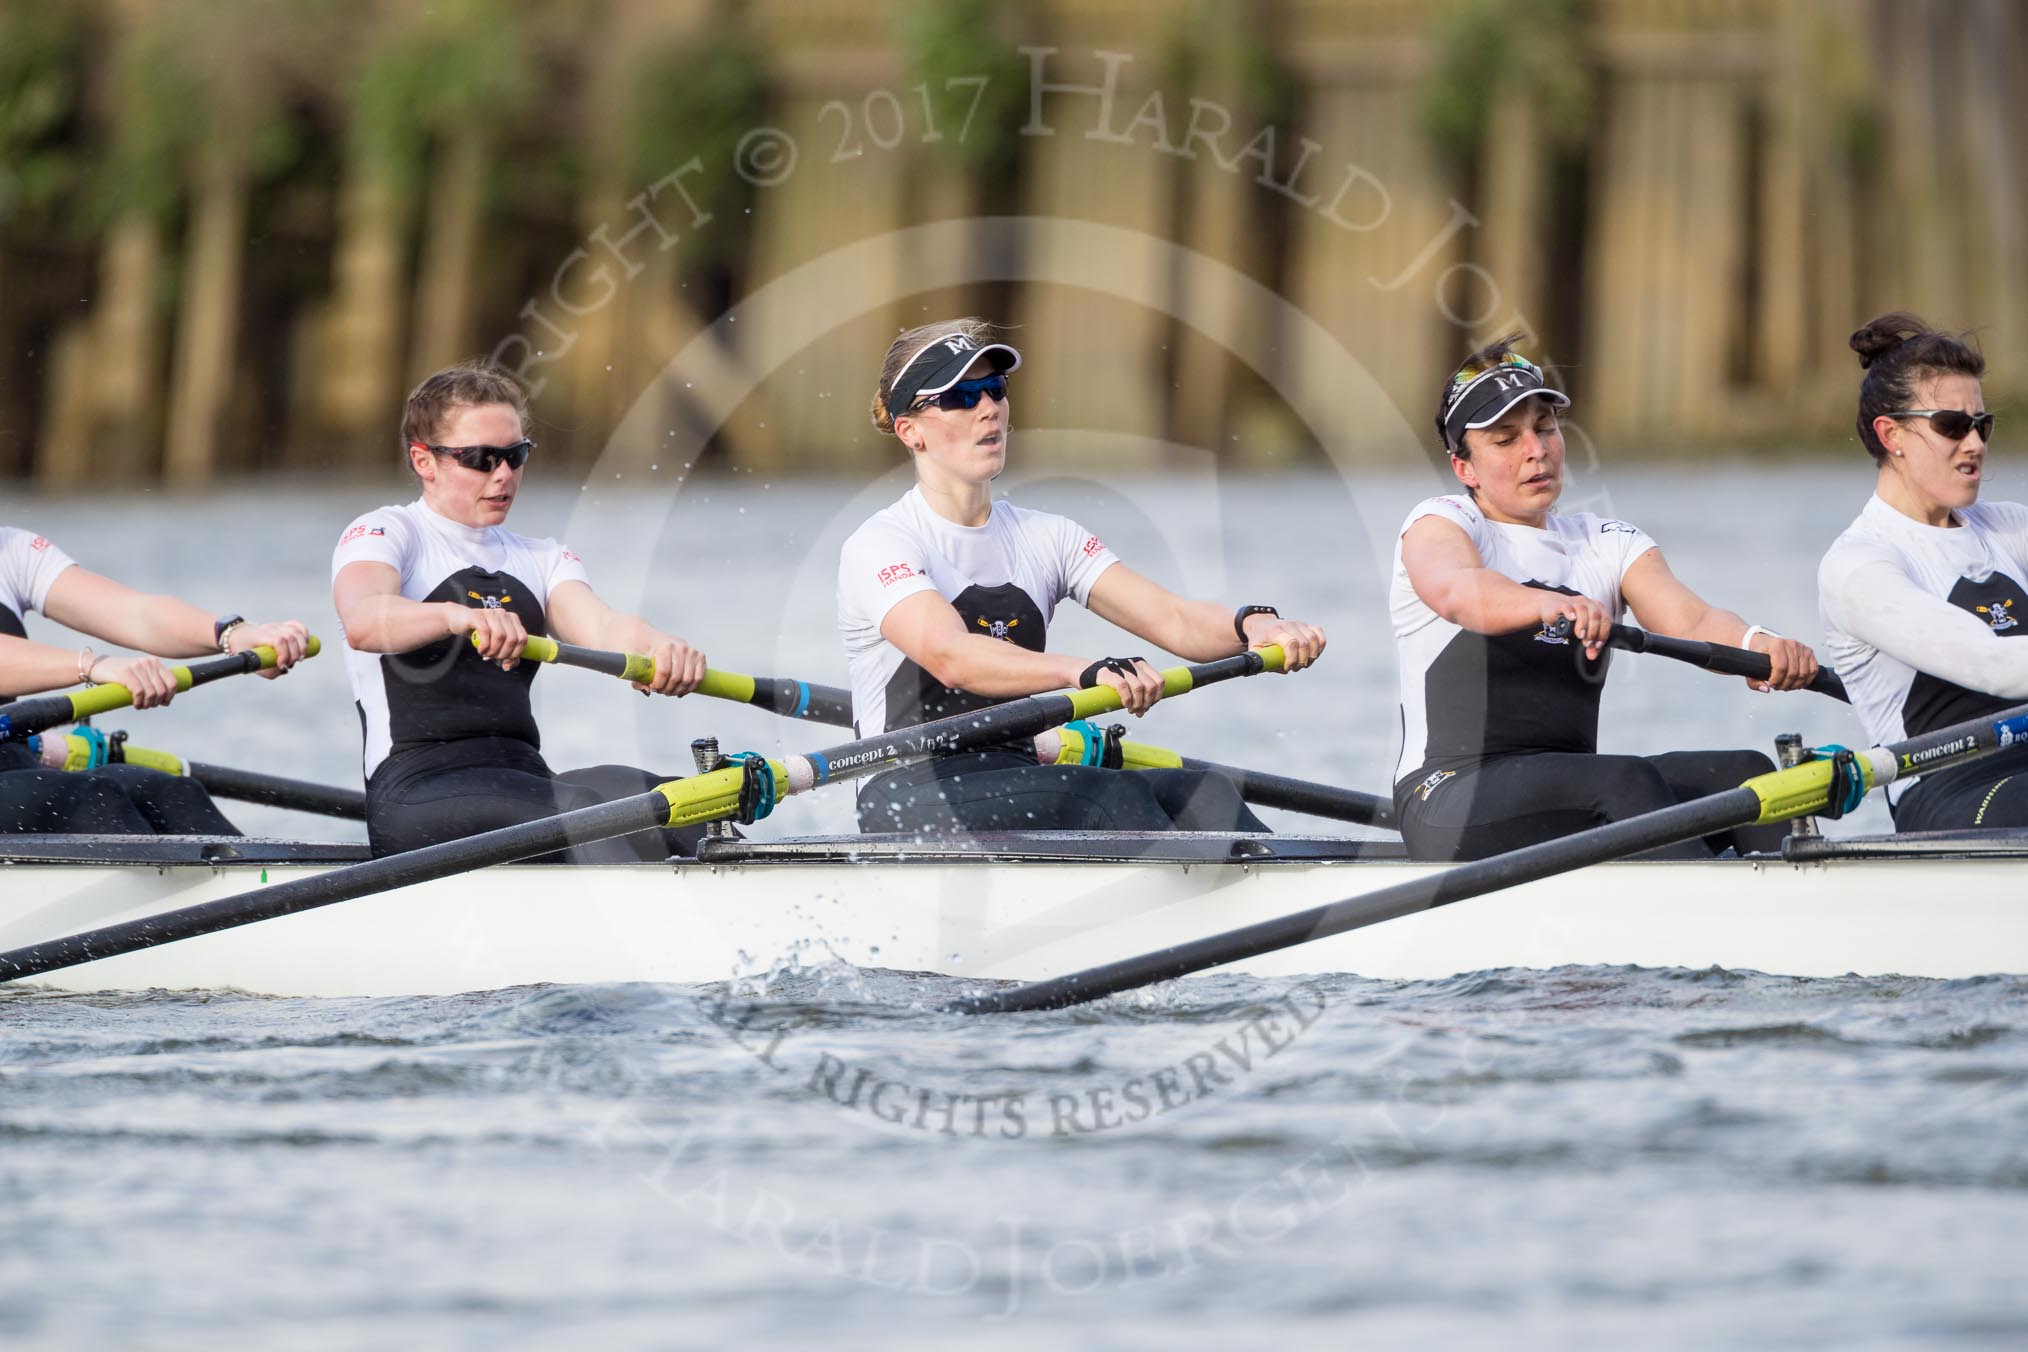 The Cancer Research UK Boat Race season 2017 - Women's Boat Race Fixture OUWBC vs Molesey BC: The Molesey boat, here 5 Katie Bartlett, 6 Elo Luik, 7 Gabriella Rodriguez, stroke Ruth Whyman.
River Thames between Putney Bridge and Mortlake,
London SW15,

United Kingdom,
on 19 March 2017 at 16:04, image #77